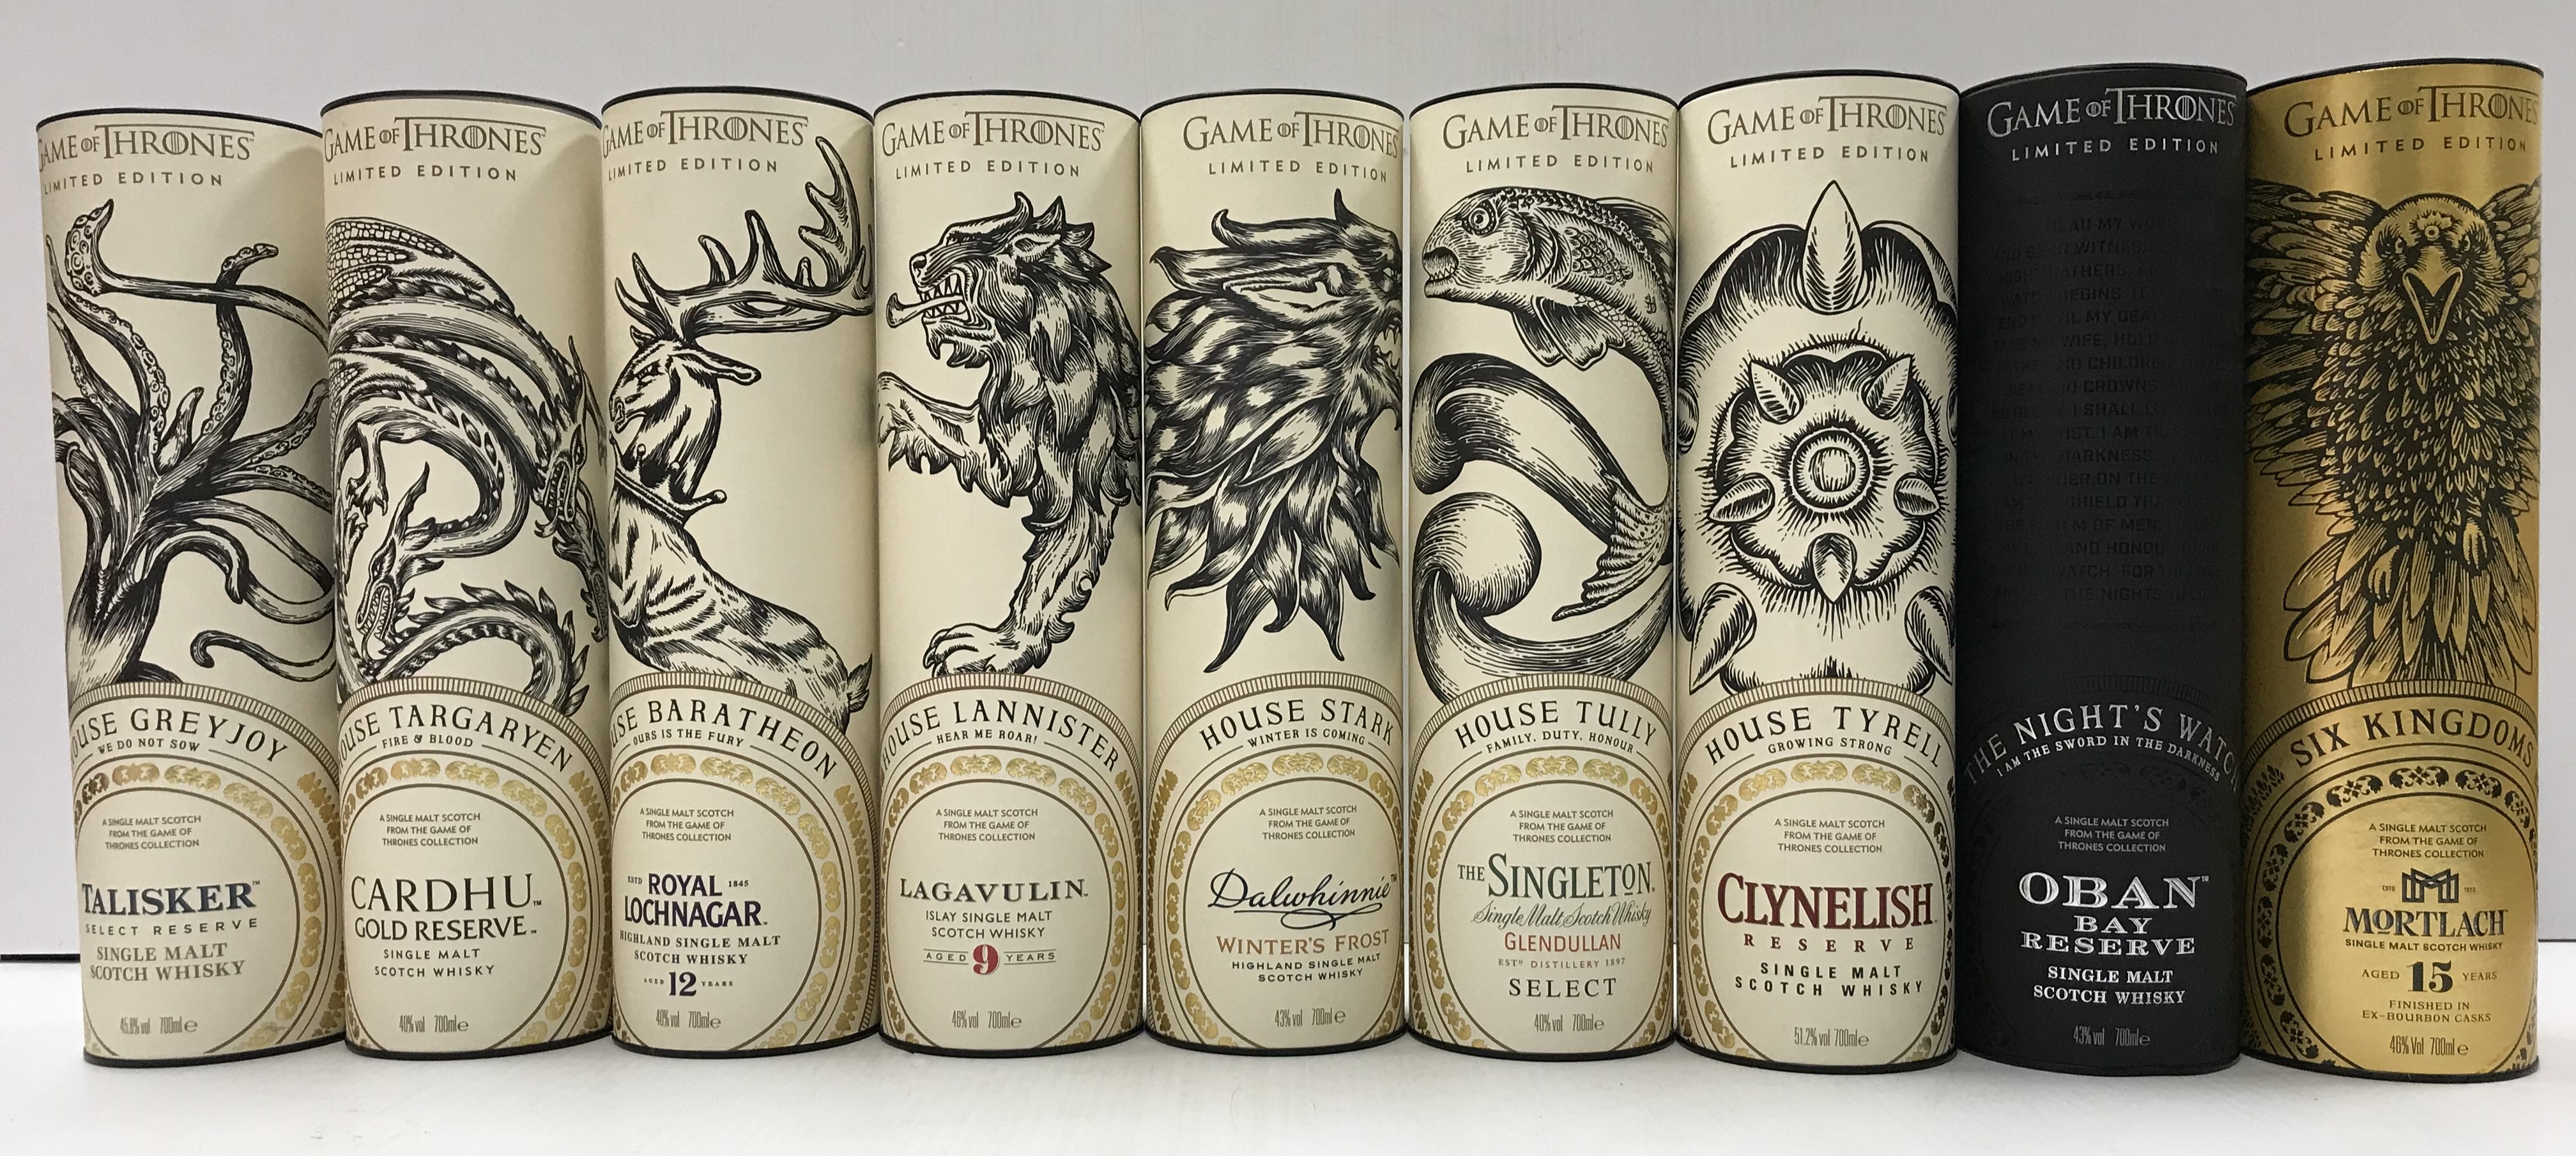 A collection of nine Game of Thrones limited edition single malt scotch whiskies including "Six